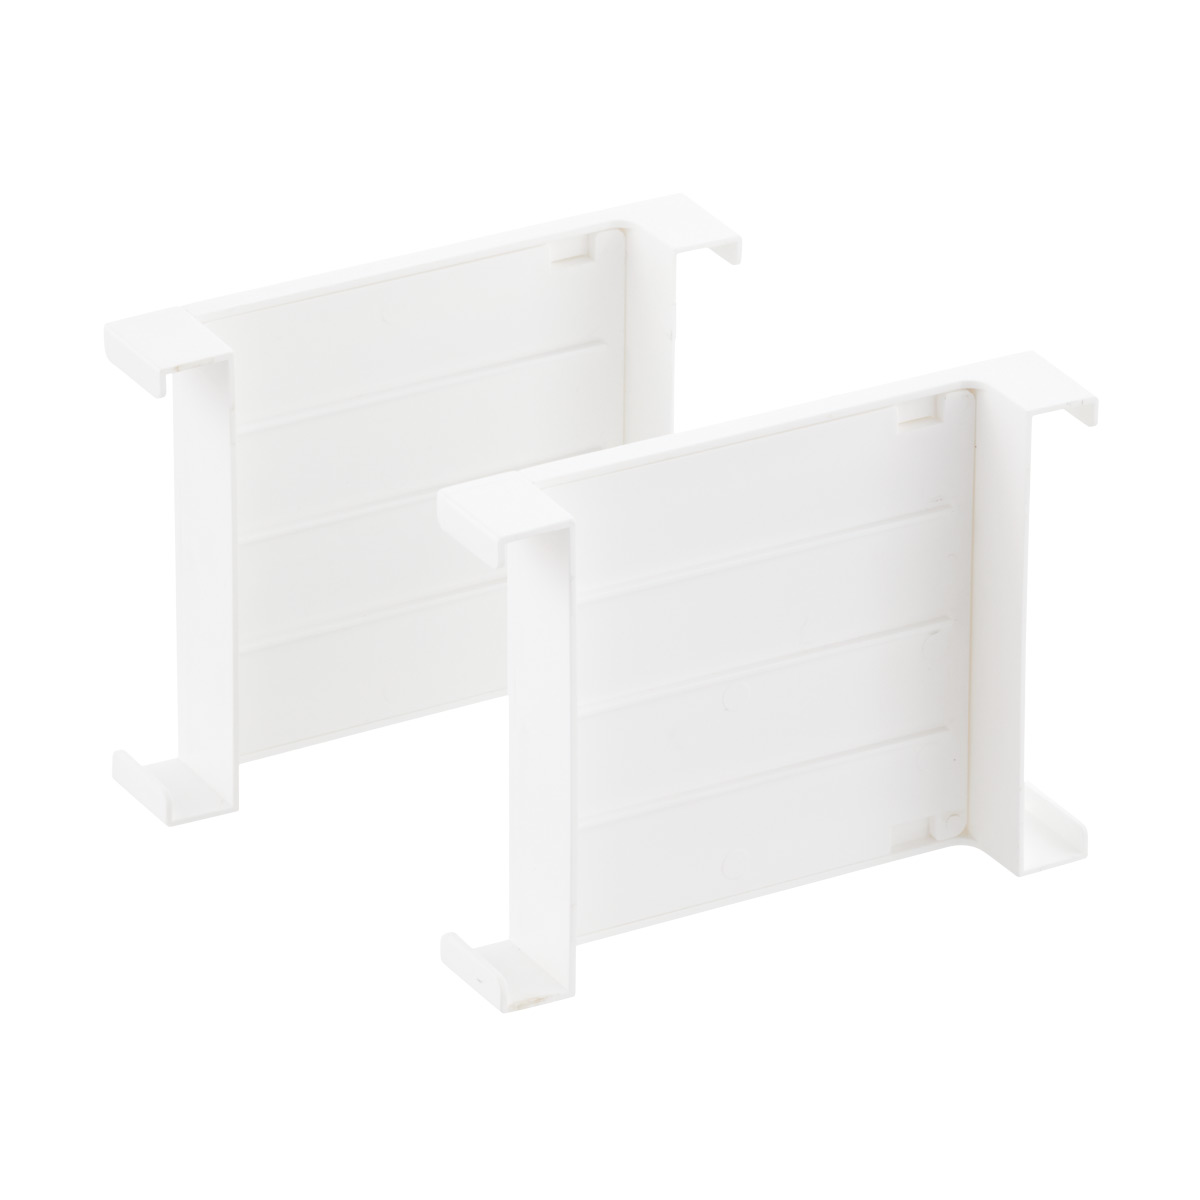 1pc White Drawer Organizer Partition, Designed For Dormitory